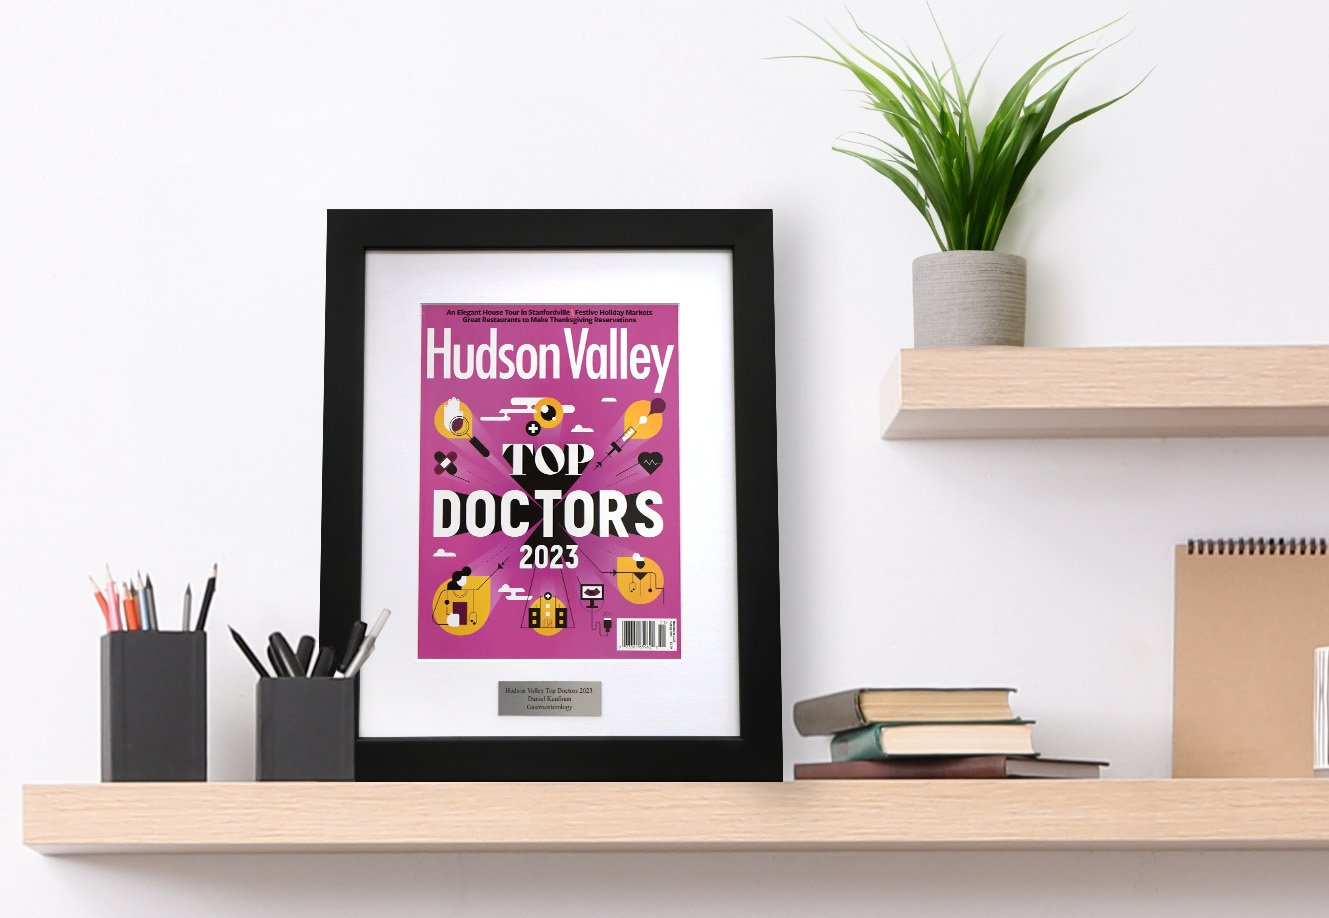 A photo of a framed Hudson Valley Magazine cover with a laser engraved plaque sitting on a shelf.